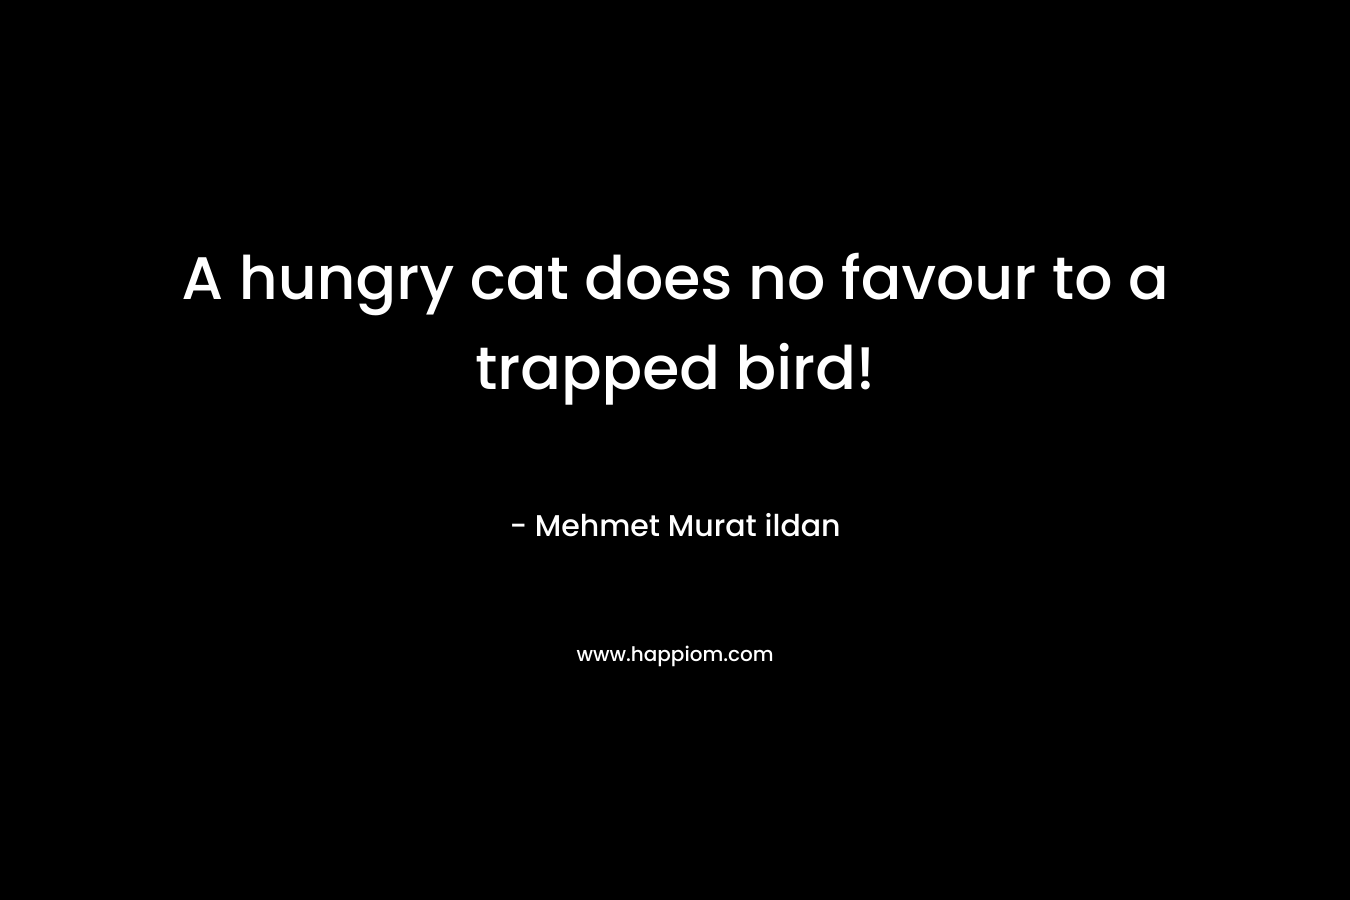 A hungry cat does no favour to a trapped bird! – Mehmet Murat ildan